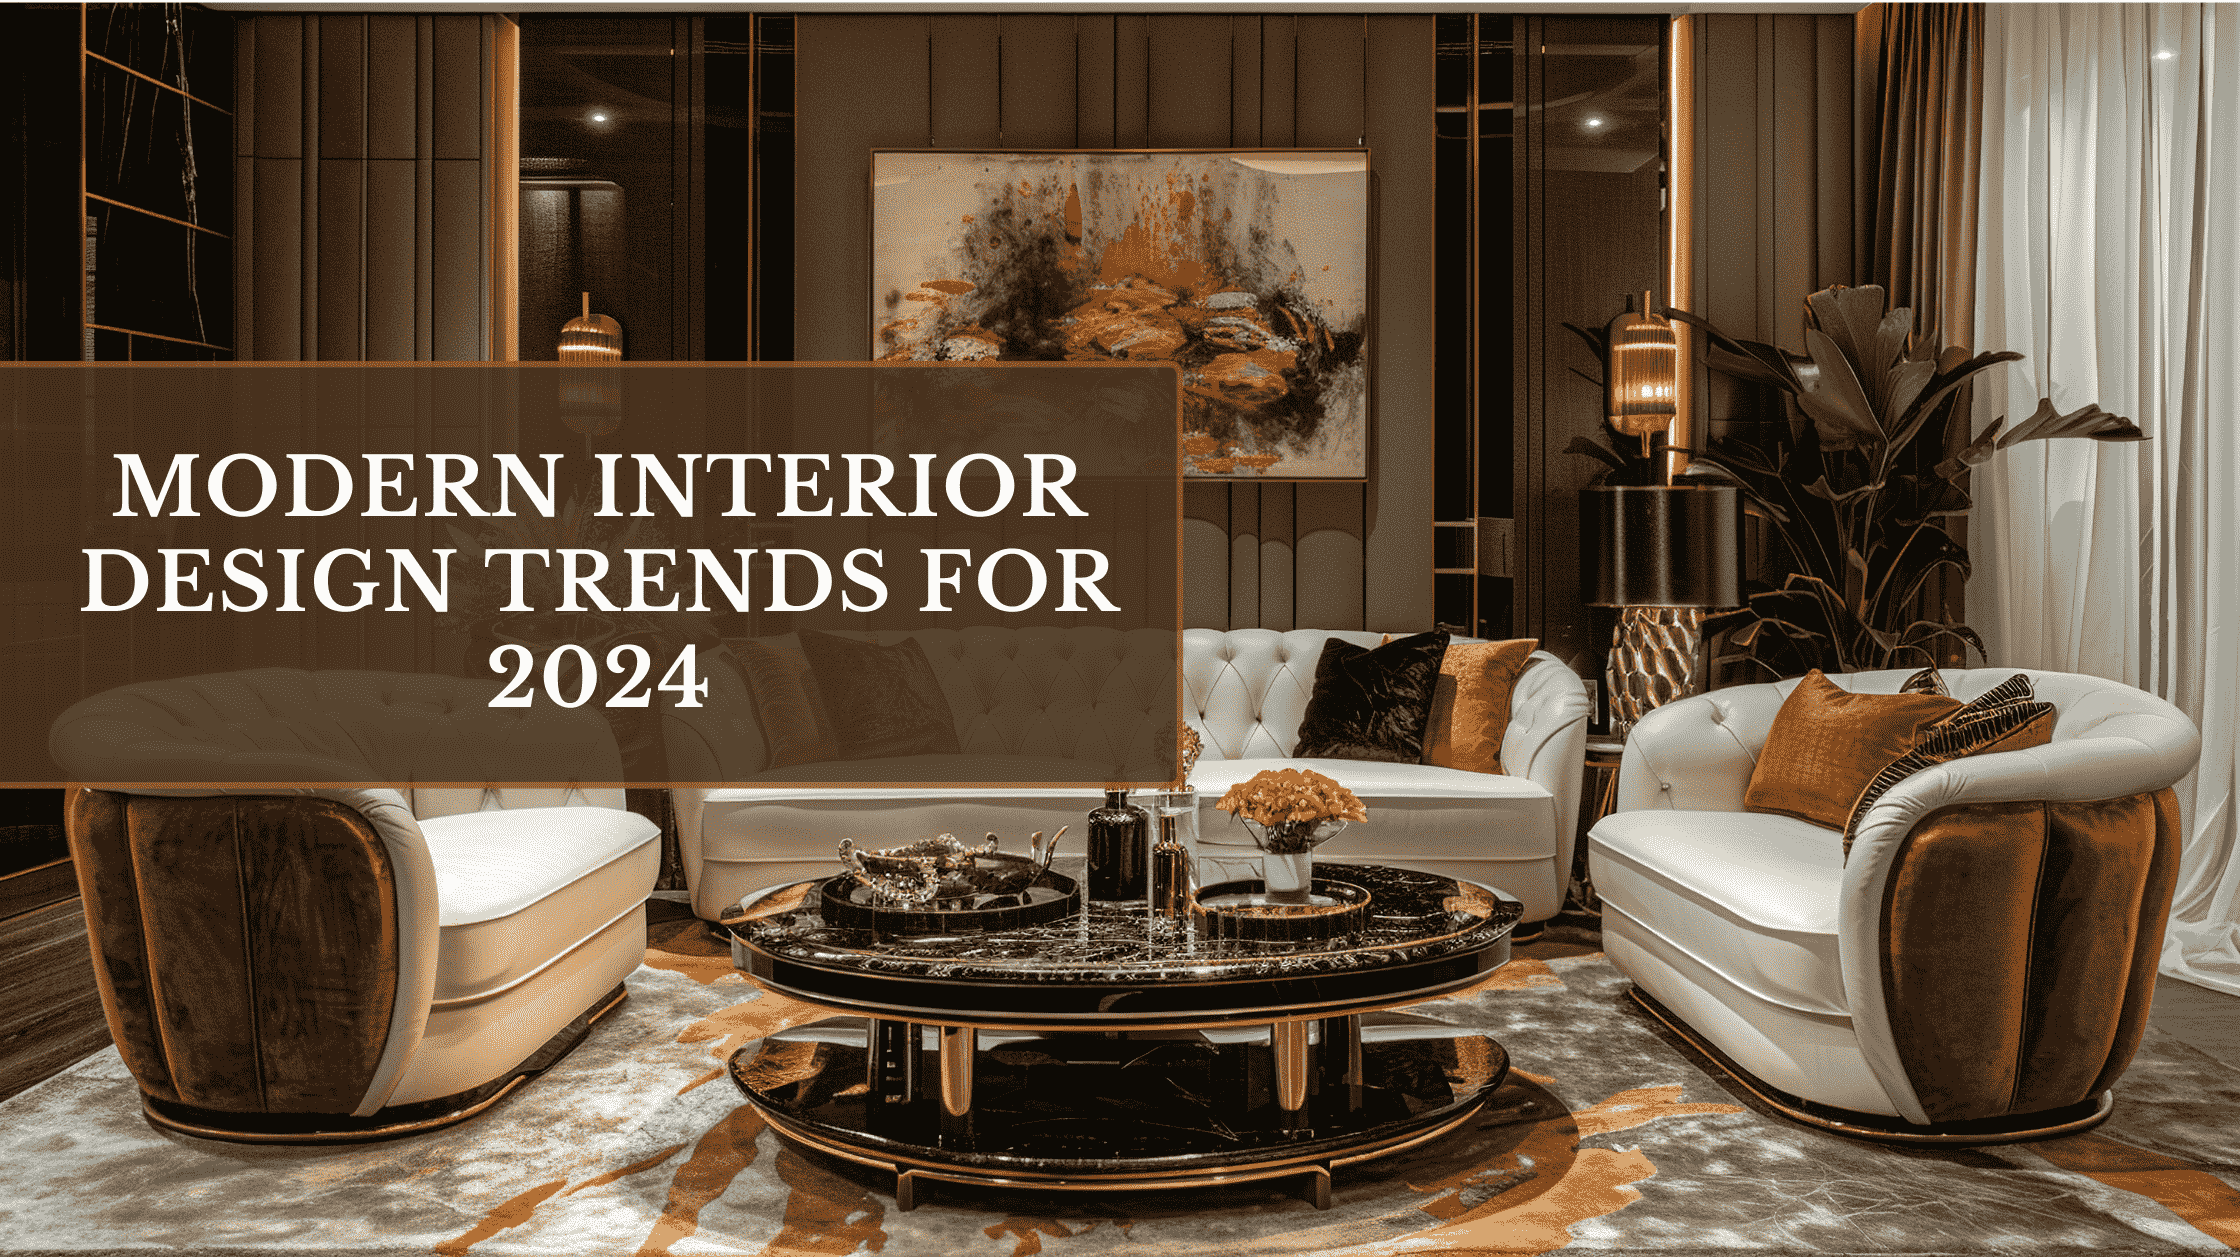 Modern Interior Design Trends for 2024: Transform Your Home with the Latest Styles